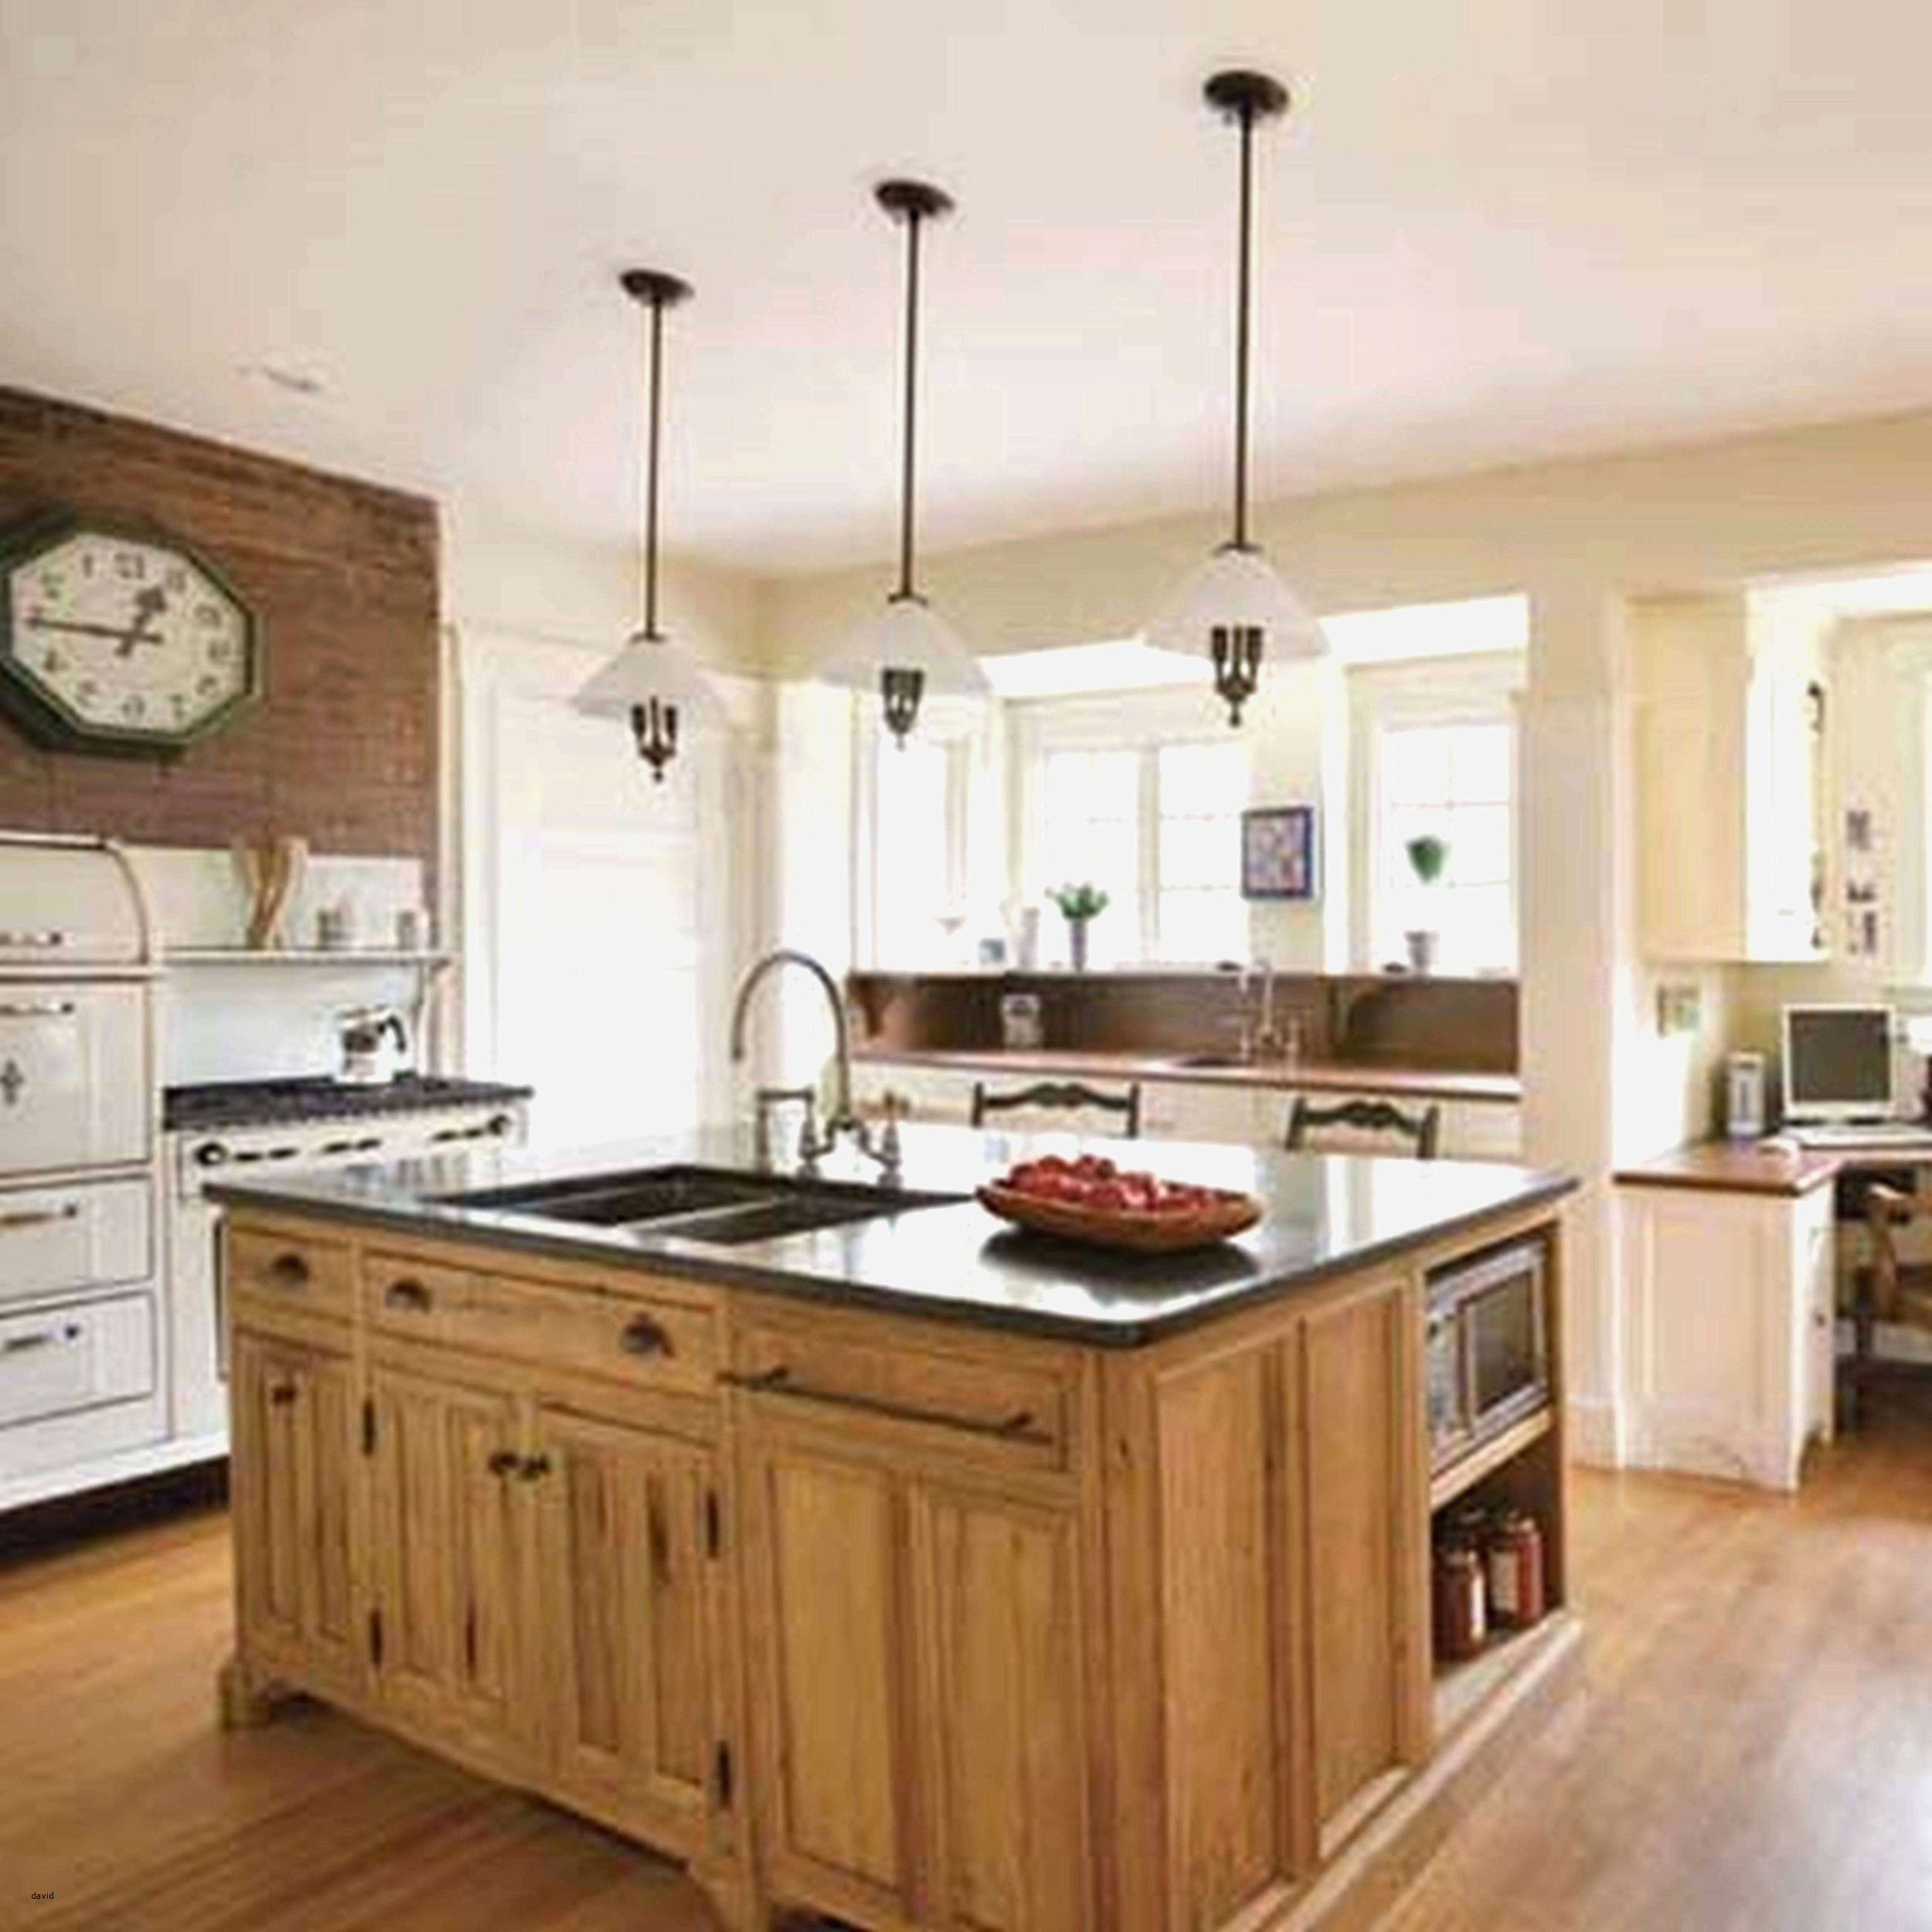 11 Perfect Kitchens with Hardwood Floors and White Cabinets 2024 free download kitchens with hardwood floors and white cabinets of 30 luxury white kitchen clock architecture inside kitchen sink sizes best average kitchen sink size unique mop sink faucet height l i 0d